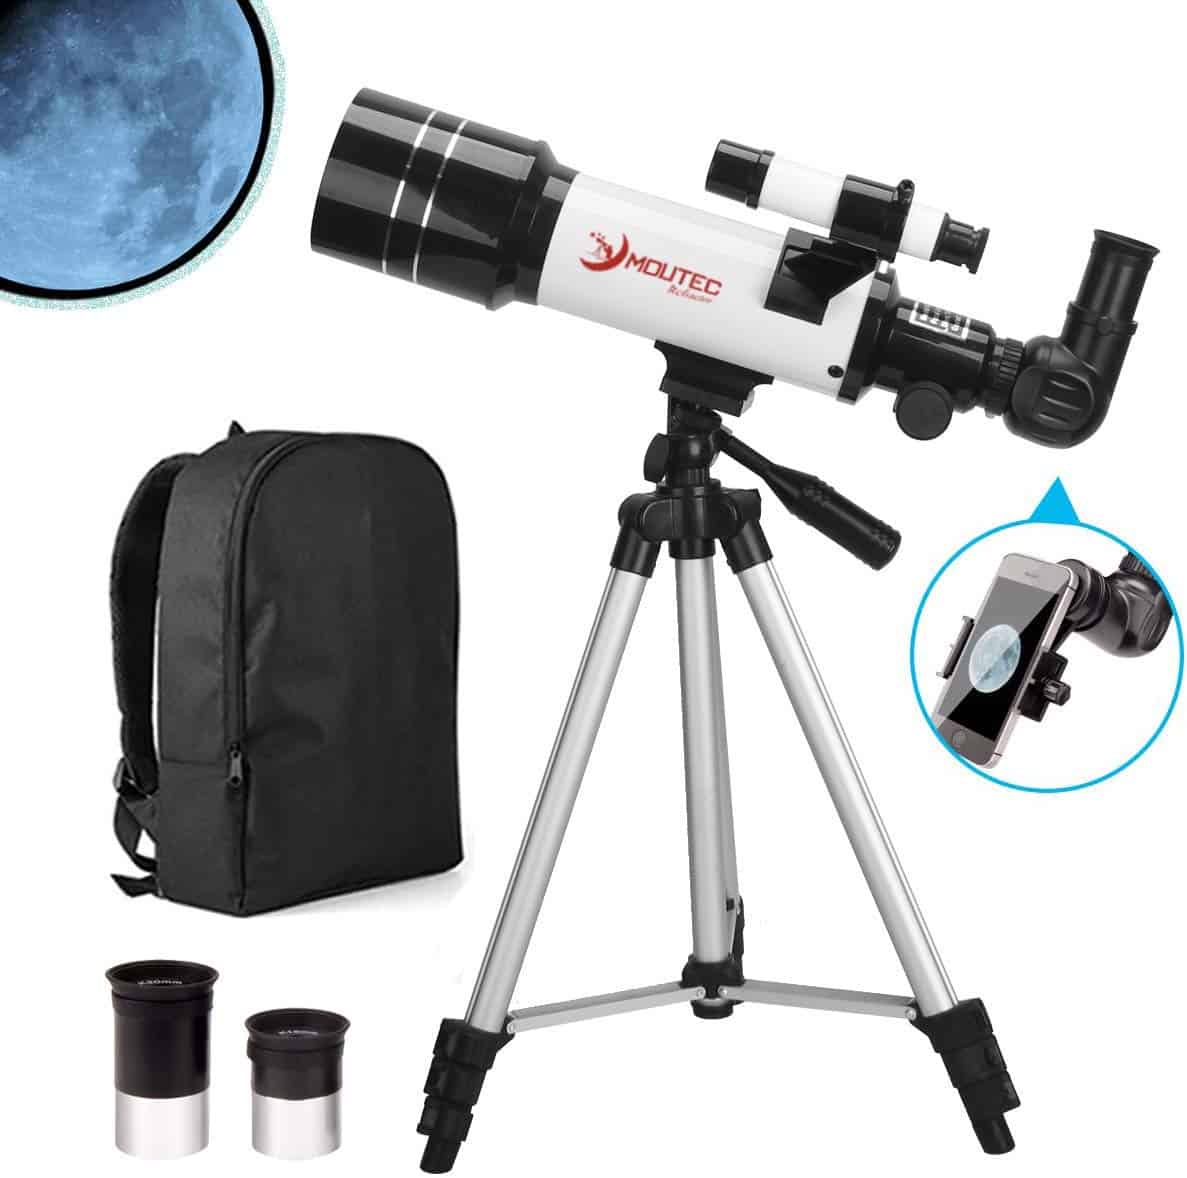 MOUTEC Telescope for Kids and Astronomy Beginners